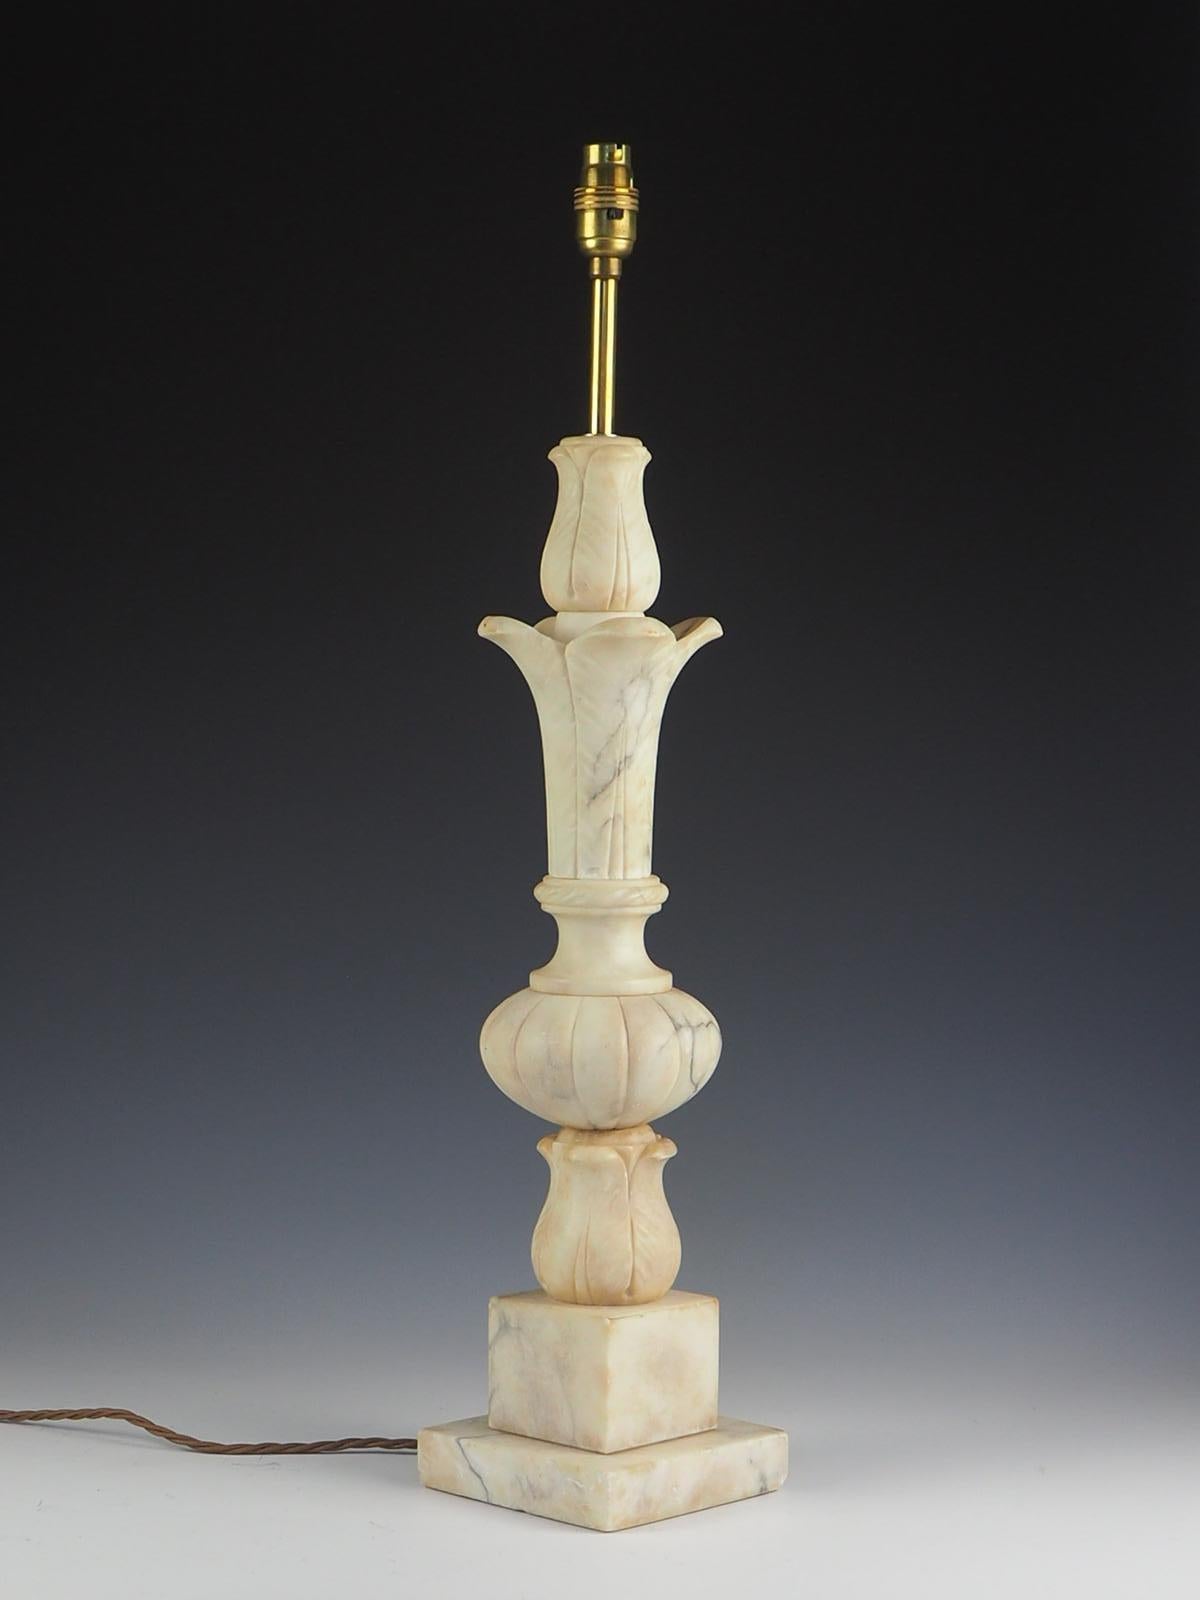 Italian Hand Carved Alabaster table lamp with beautiful shaped body, resting on a square platform base. Milky white alabaster with grey and gold veining.

Each section of this lamp has been carved individually and pieced together. 

Exquisite,